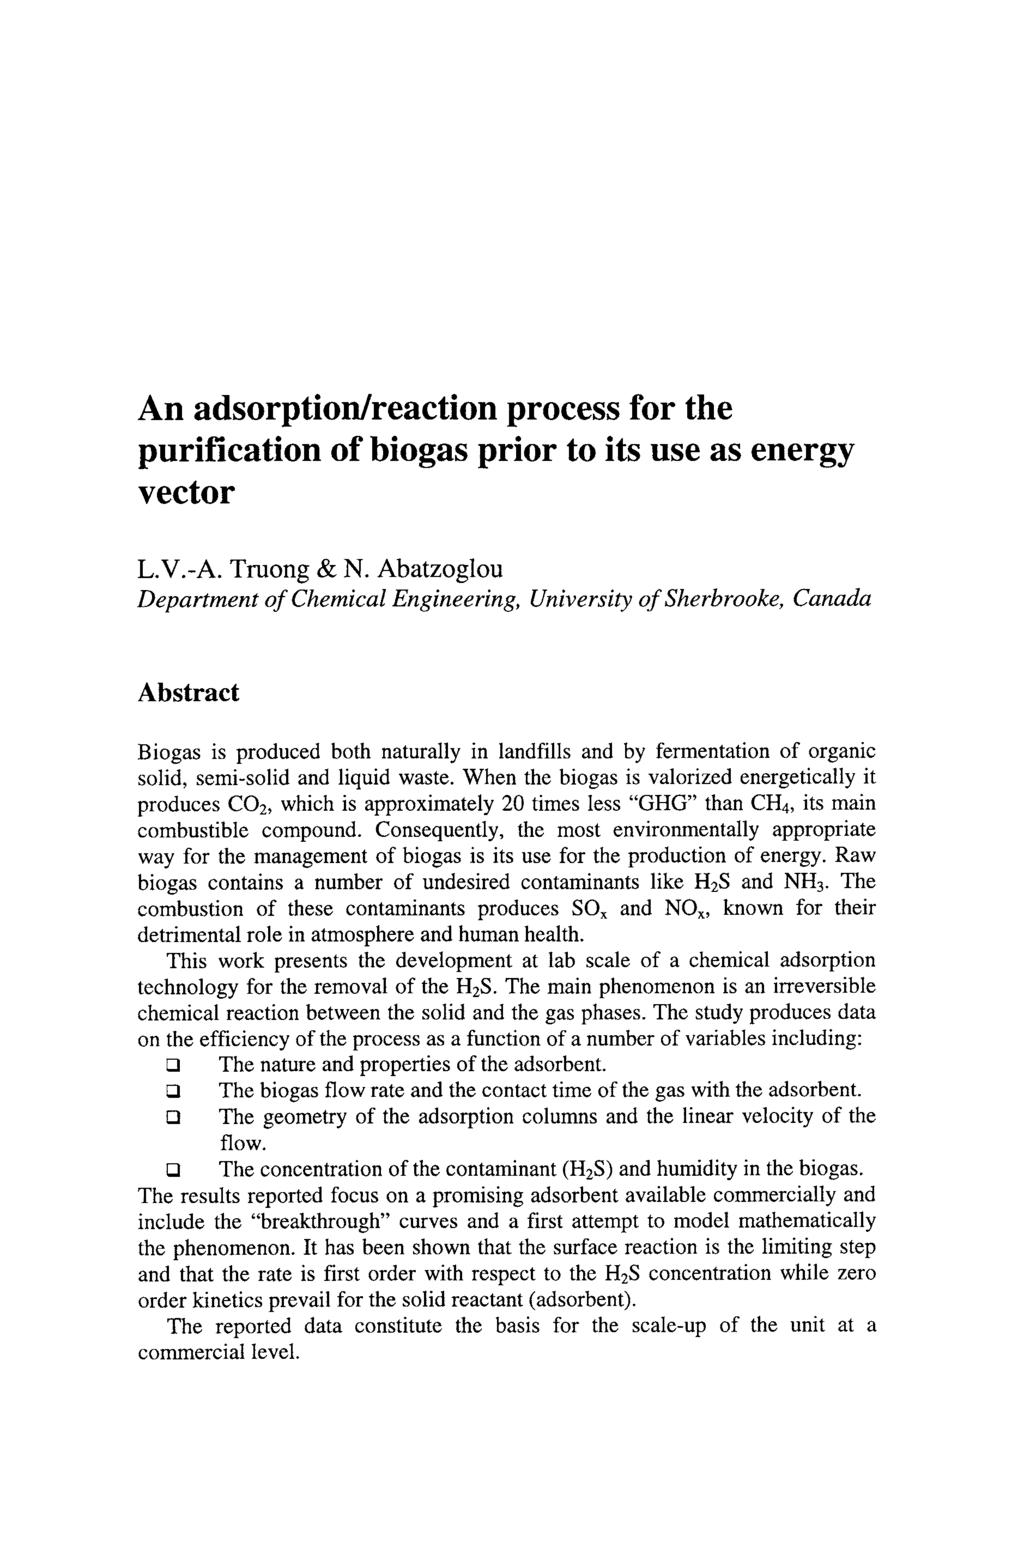 An adsorptionlreaction process for the purification of biogas prior to its use as energy vector L.V.-A. Truong & N.